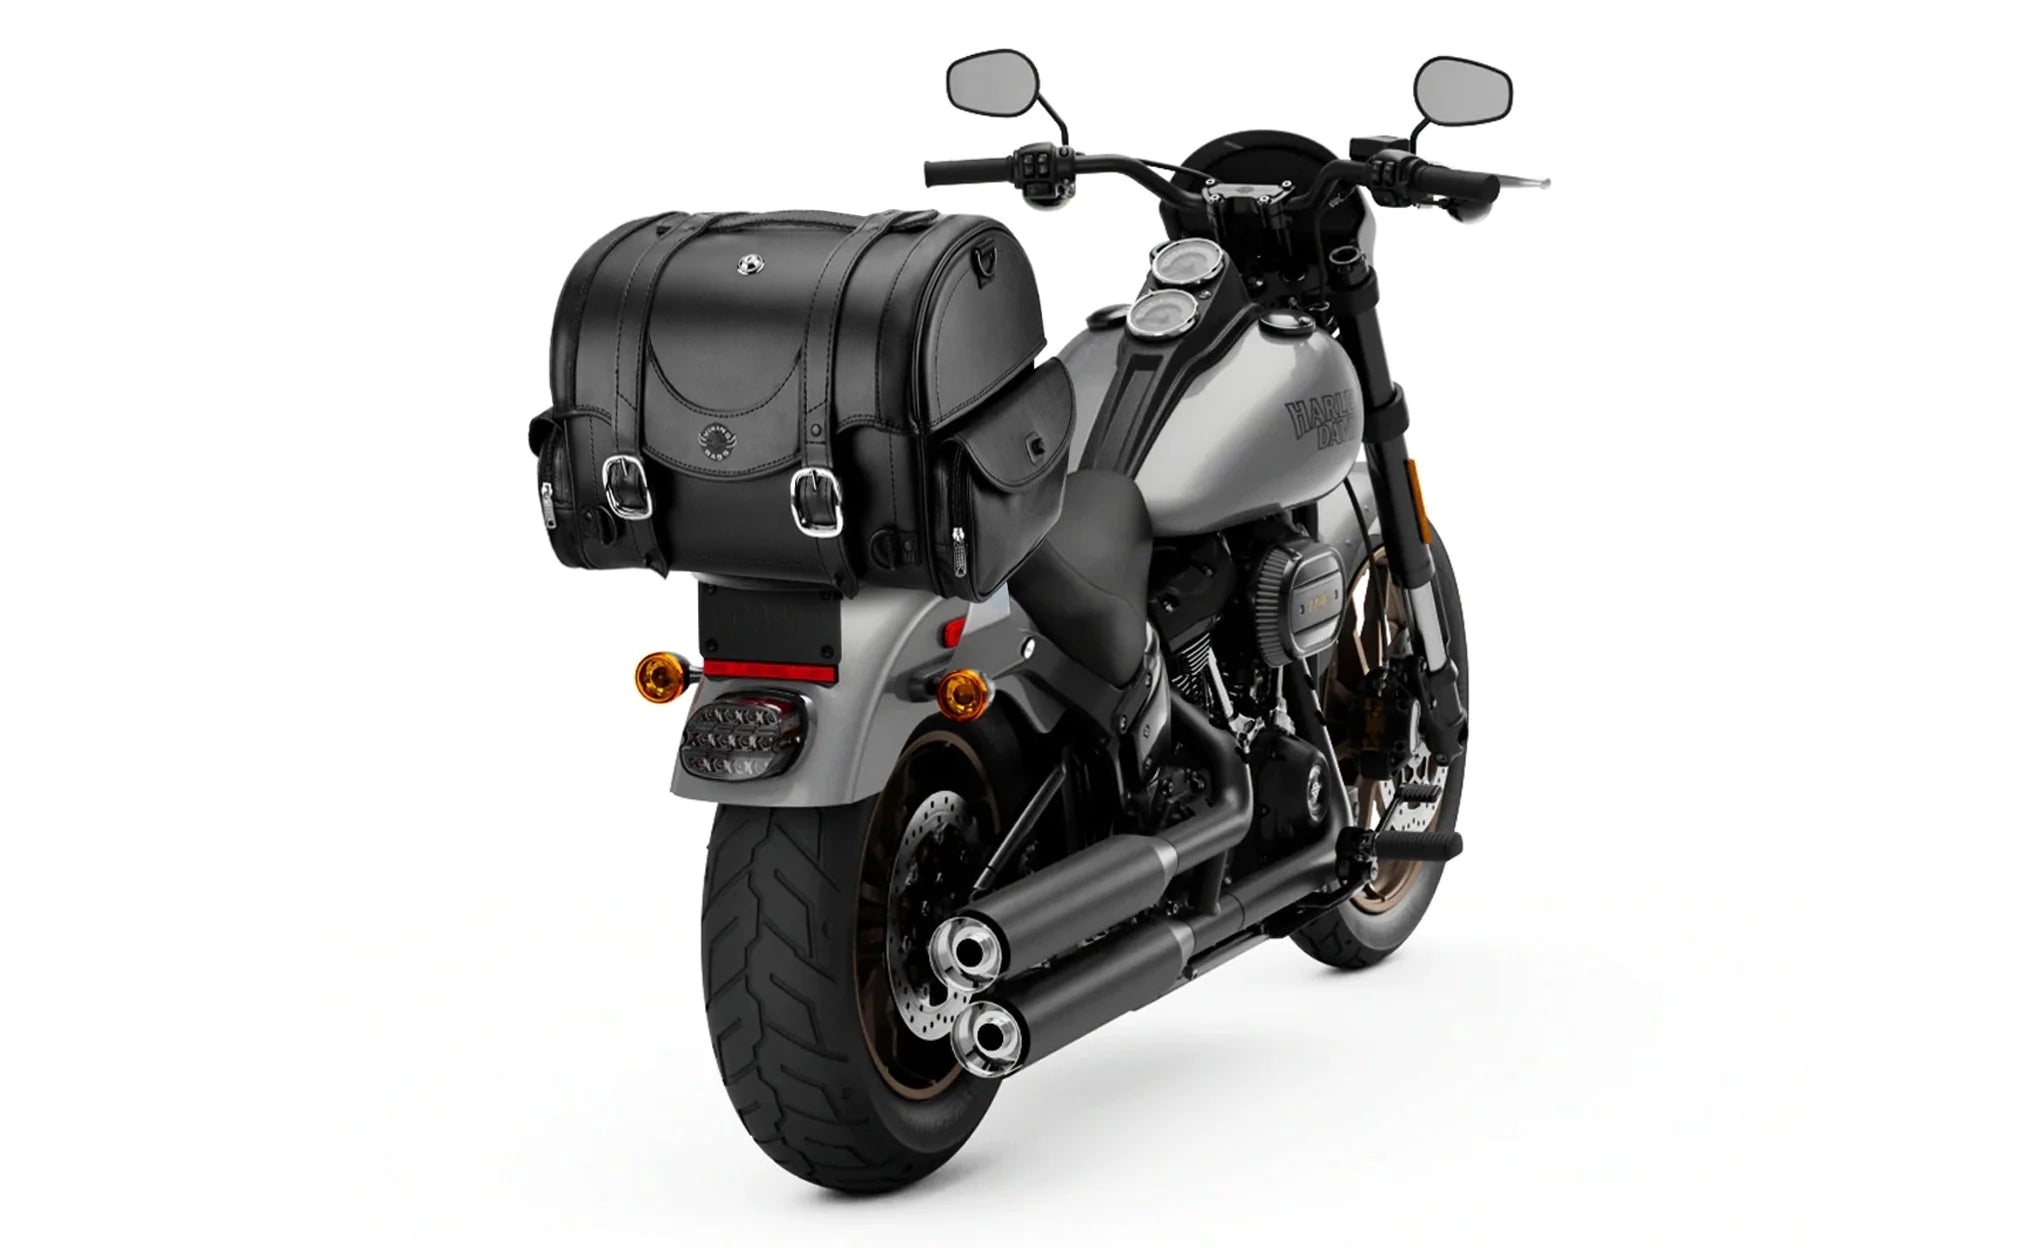 21L - Century Medium Leather Motorcycle Roll Bag on Bike Photo @expand